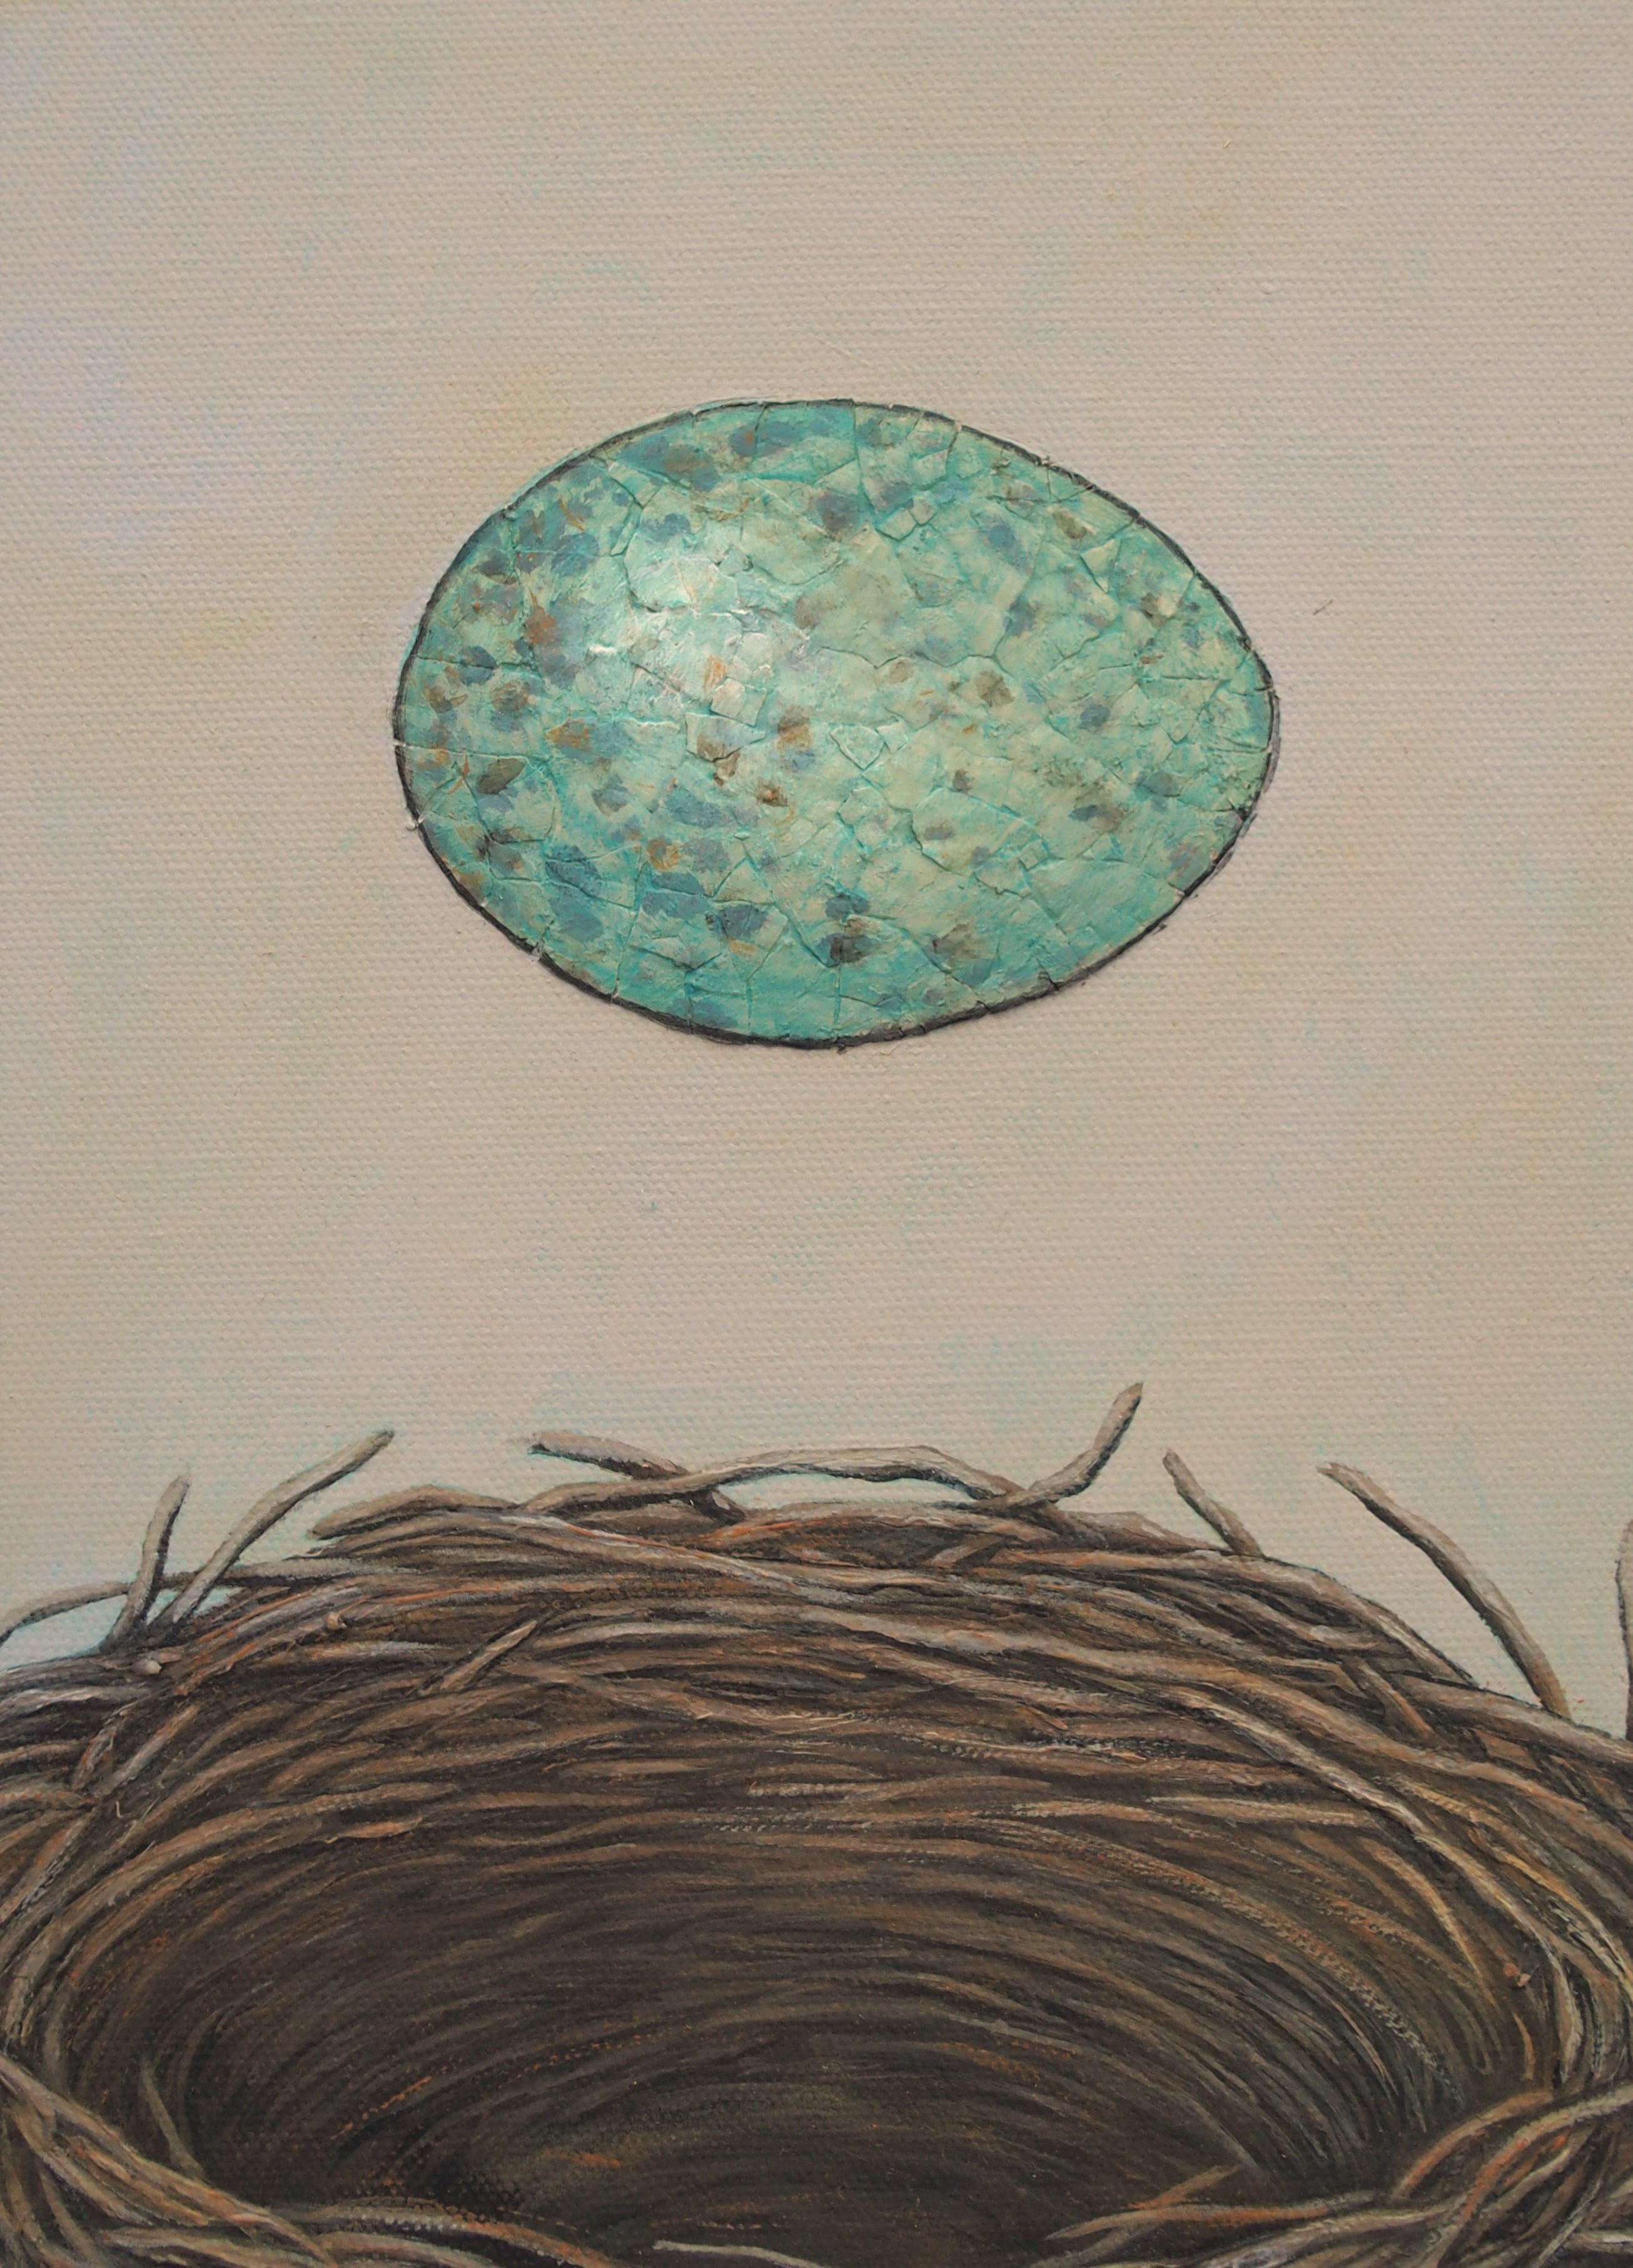 <p>Artist Comments<br>A teal egg floats above a carefully balanced bird's nest. Artist Jennifer Ross utilized her reconstructing technique to shape the egg using a collage of broken eggshells. â€œThe title of this painting really conveys everything